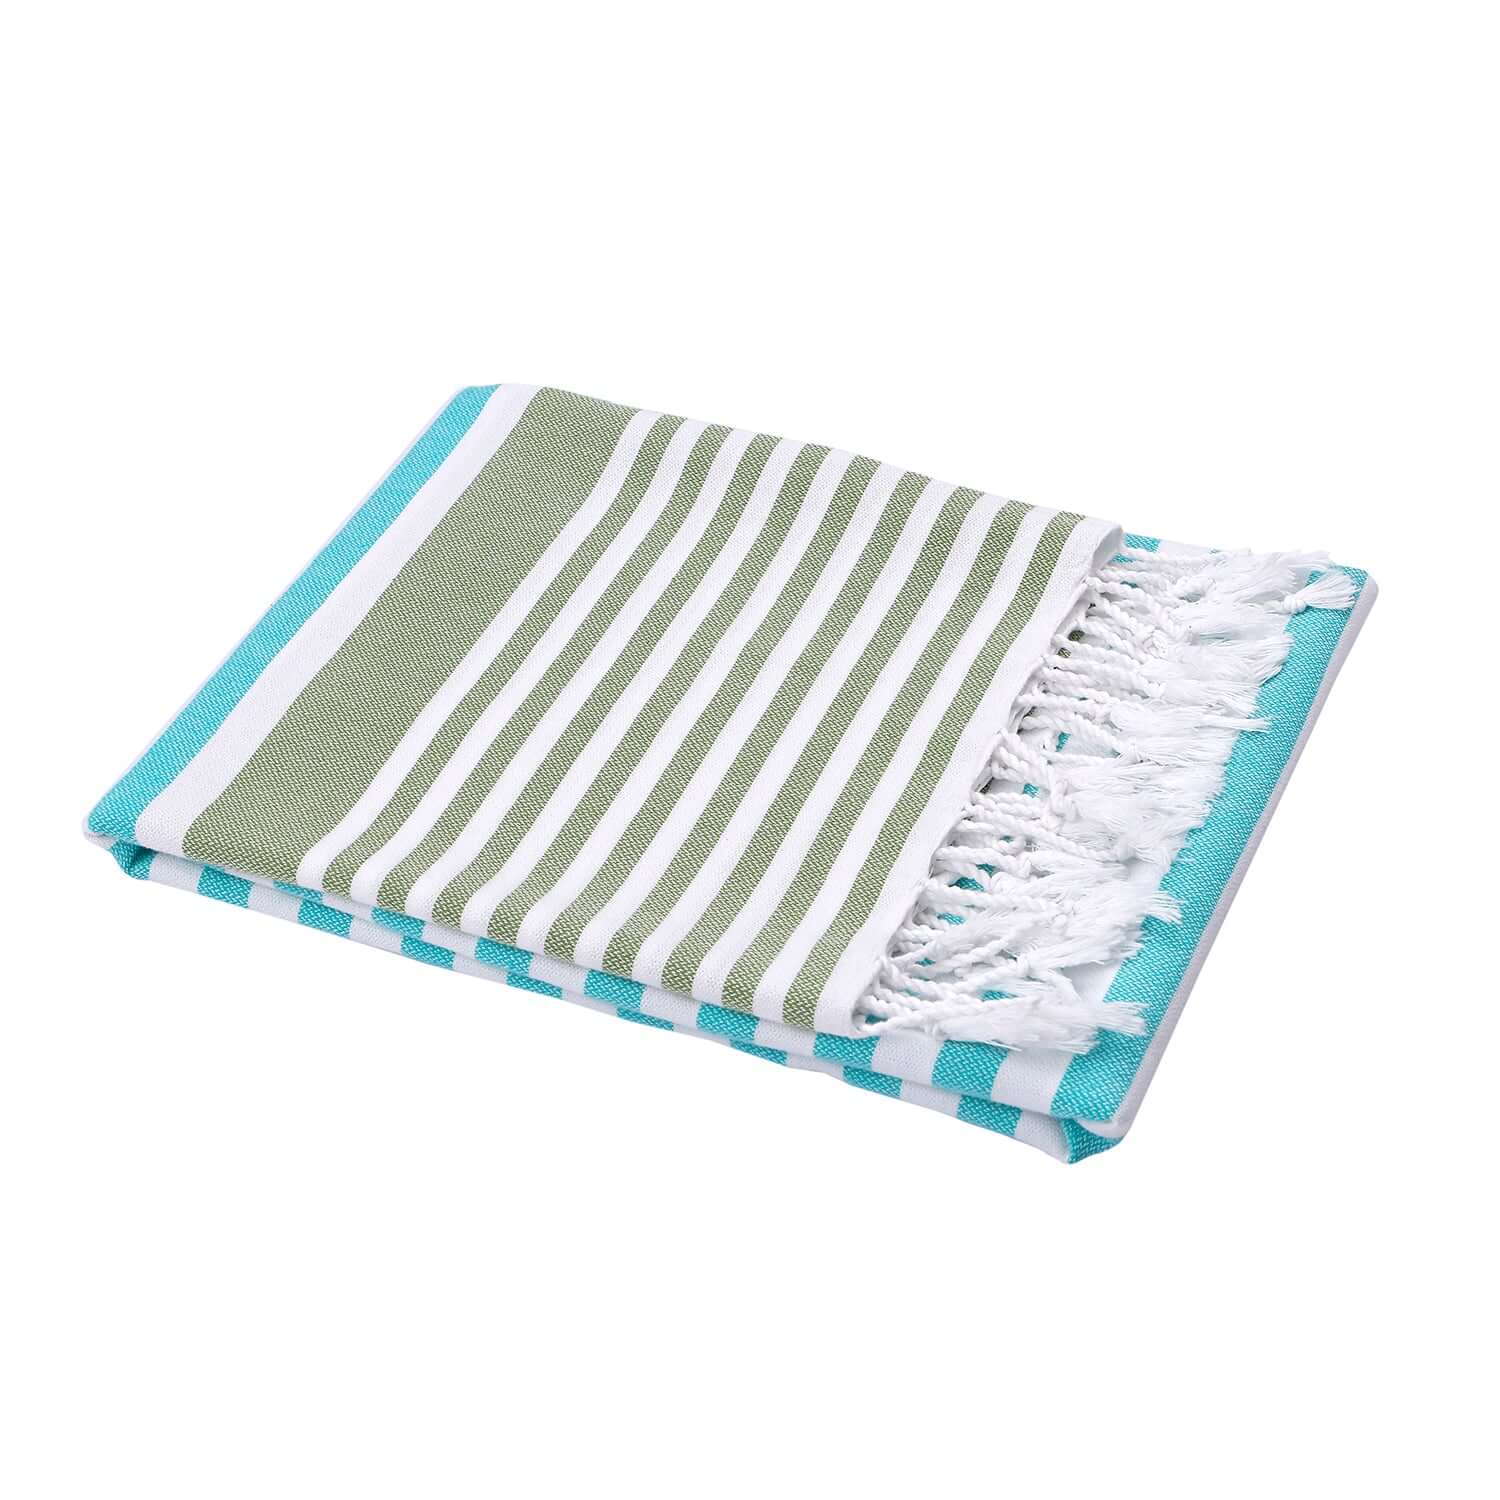 Folded Loom Legacy turquoise and green beach towel with subtle white vertical stripes. The towel features fringed white tassels on its edge, all displayed against a white background.